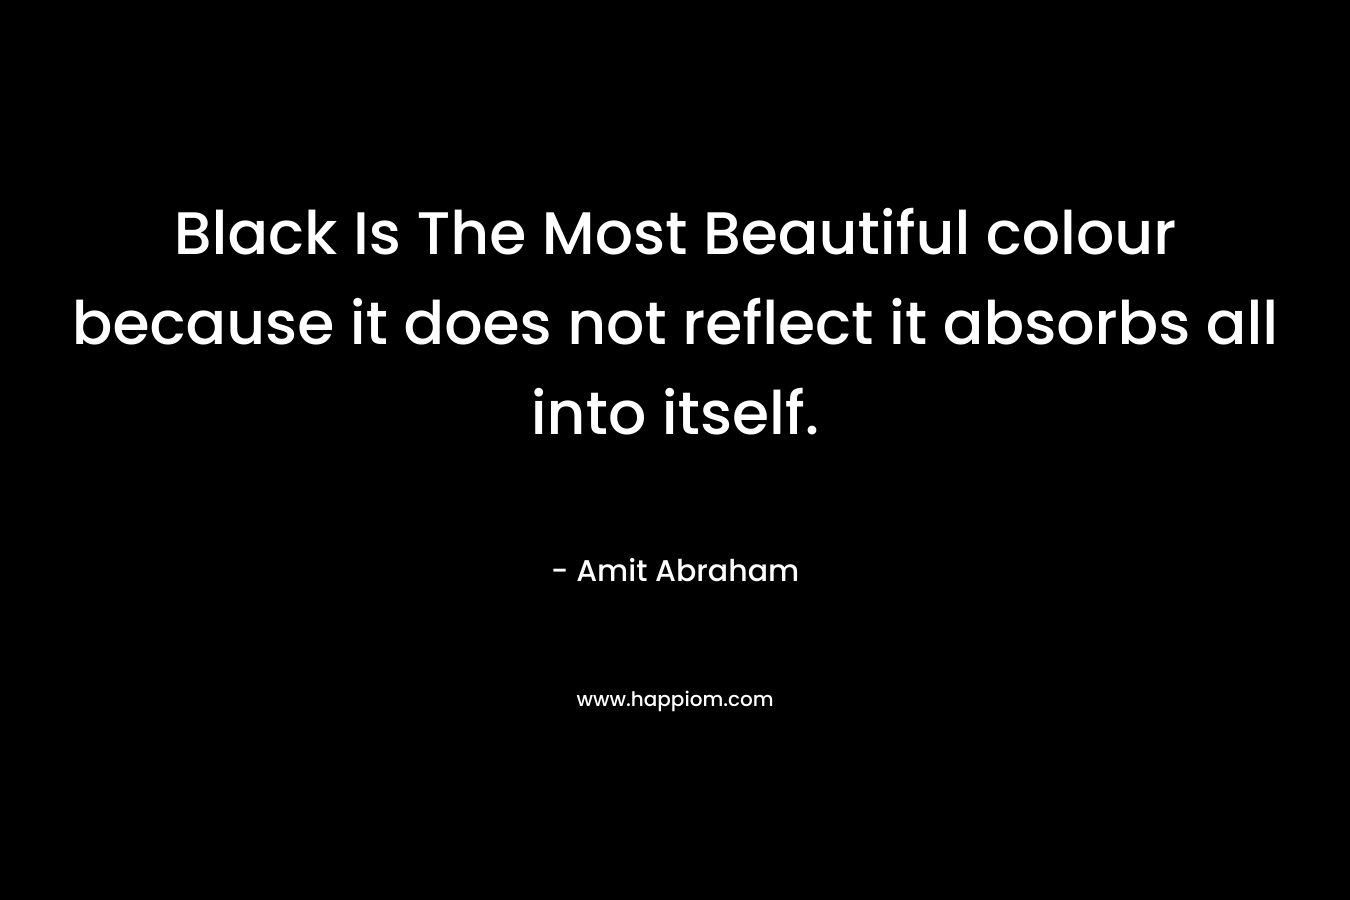 Black Is The Most Beautiful colour because it does not reflect it absorbs all into itself. – Amit Abraham